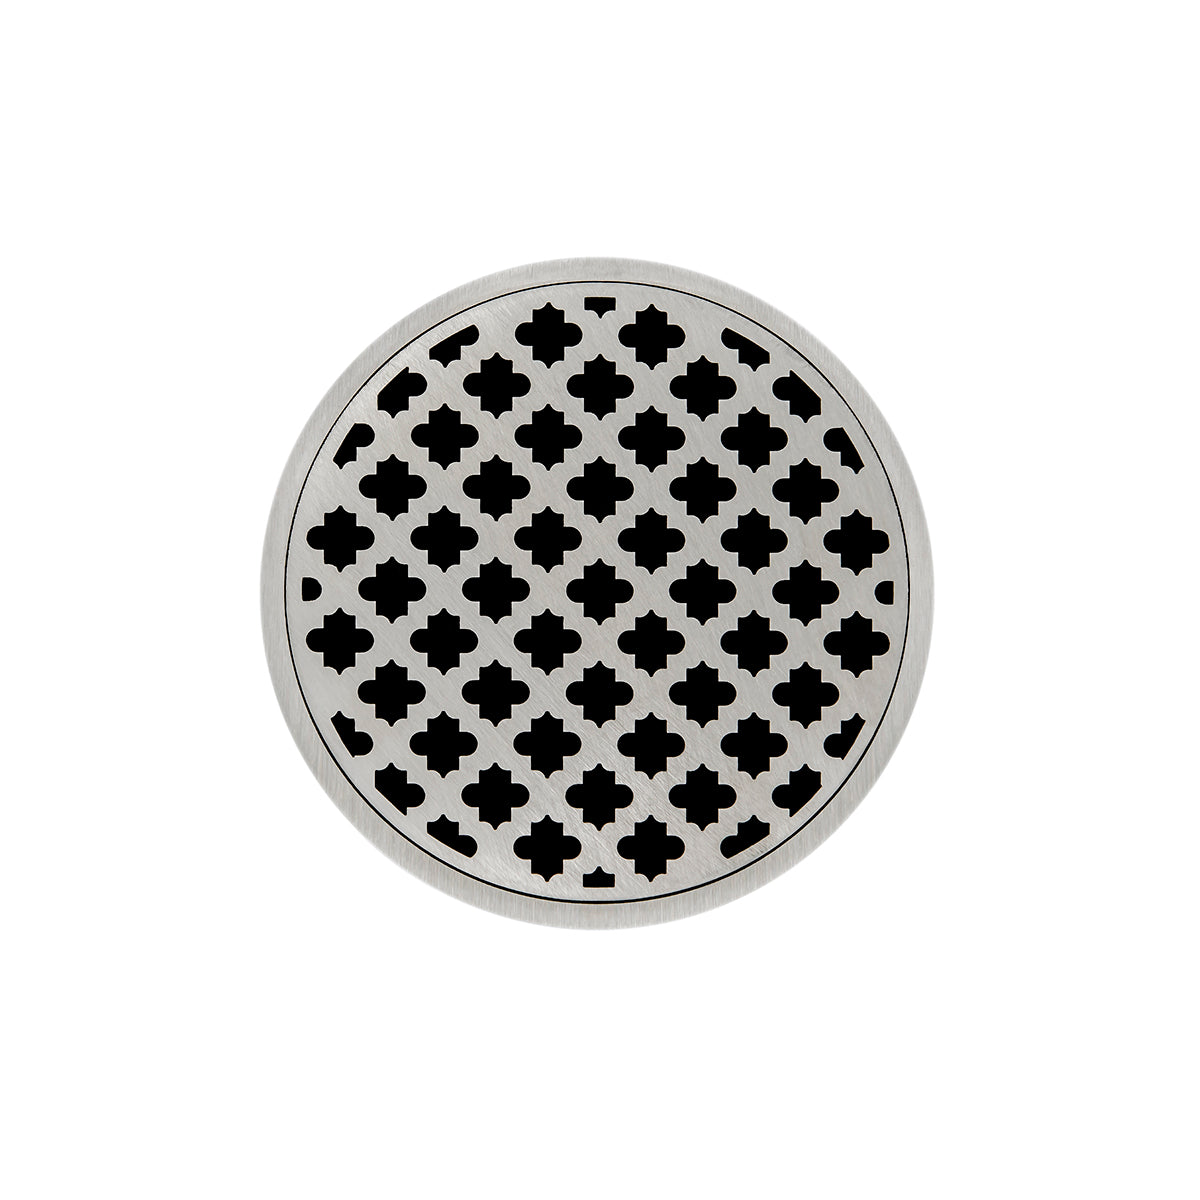 Infinity Drain 5" Round RMD 5 High Flow Premium Center Drain Kit with Moor Pattern Decorative Plate with PVC Drain Body, 3" Outlet